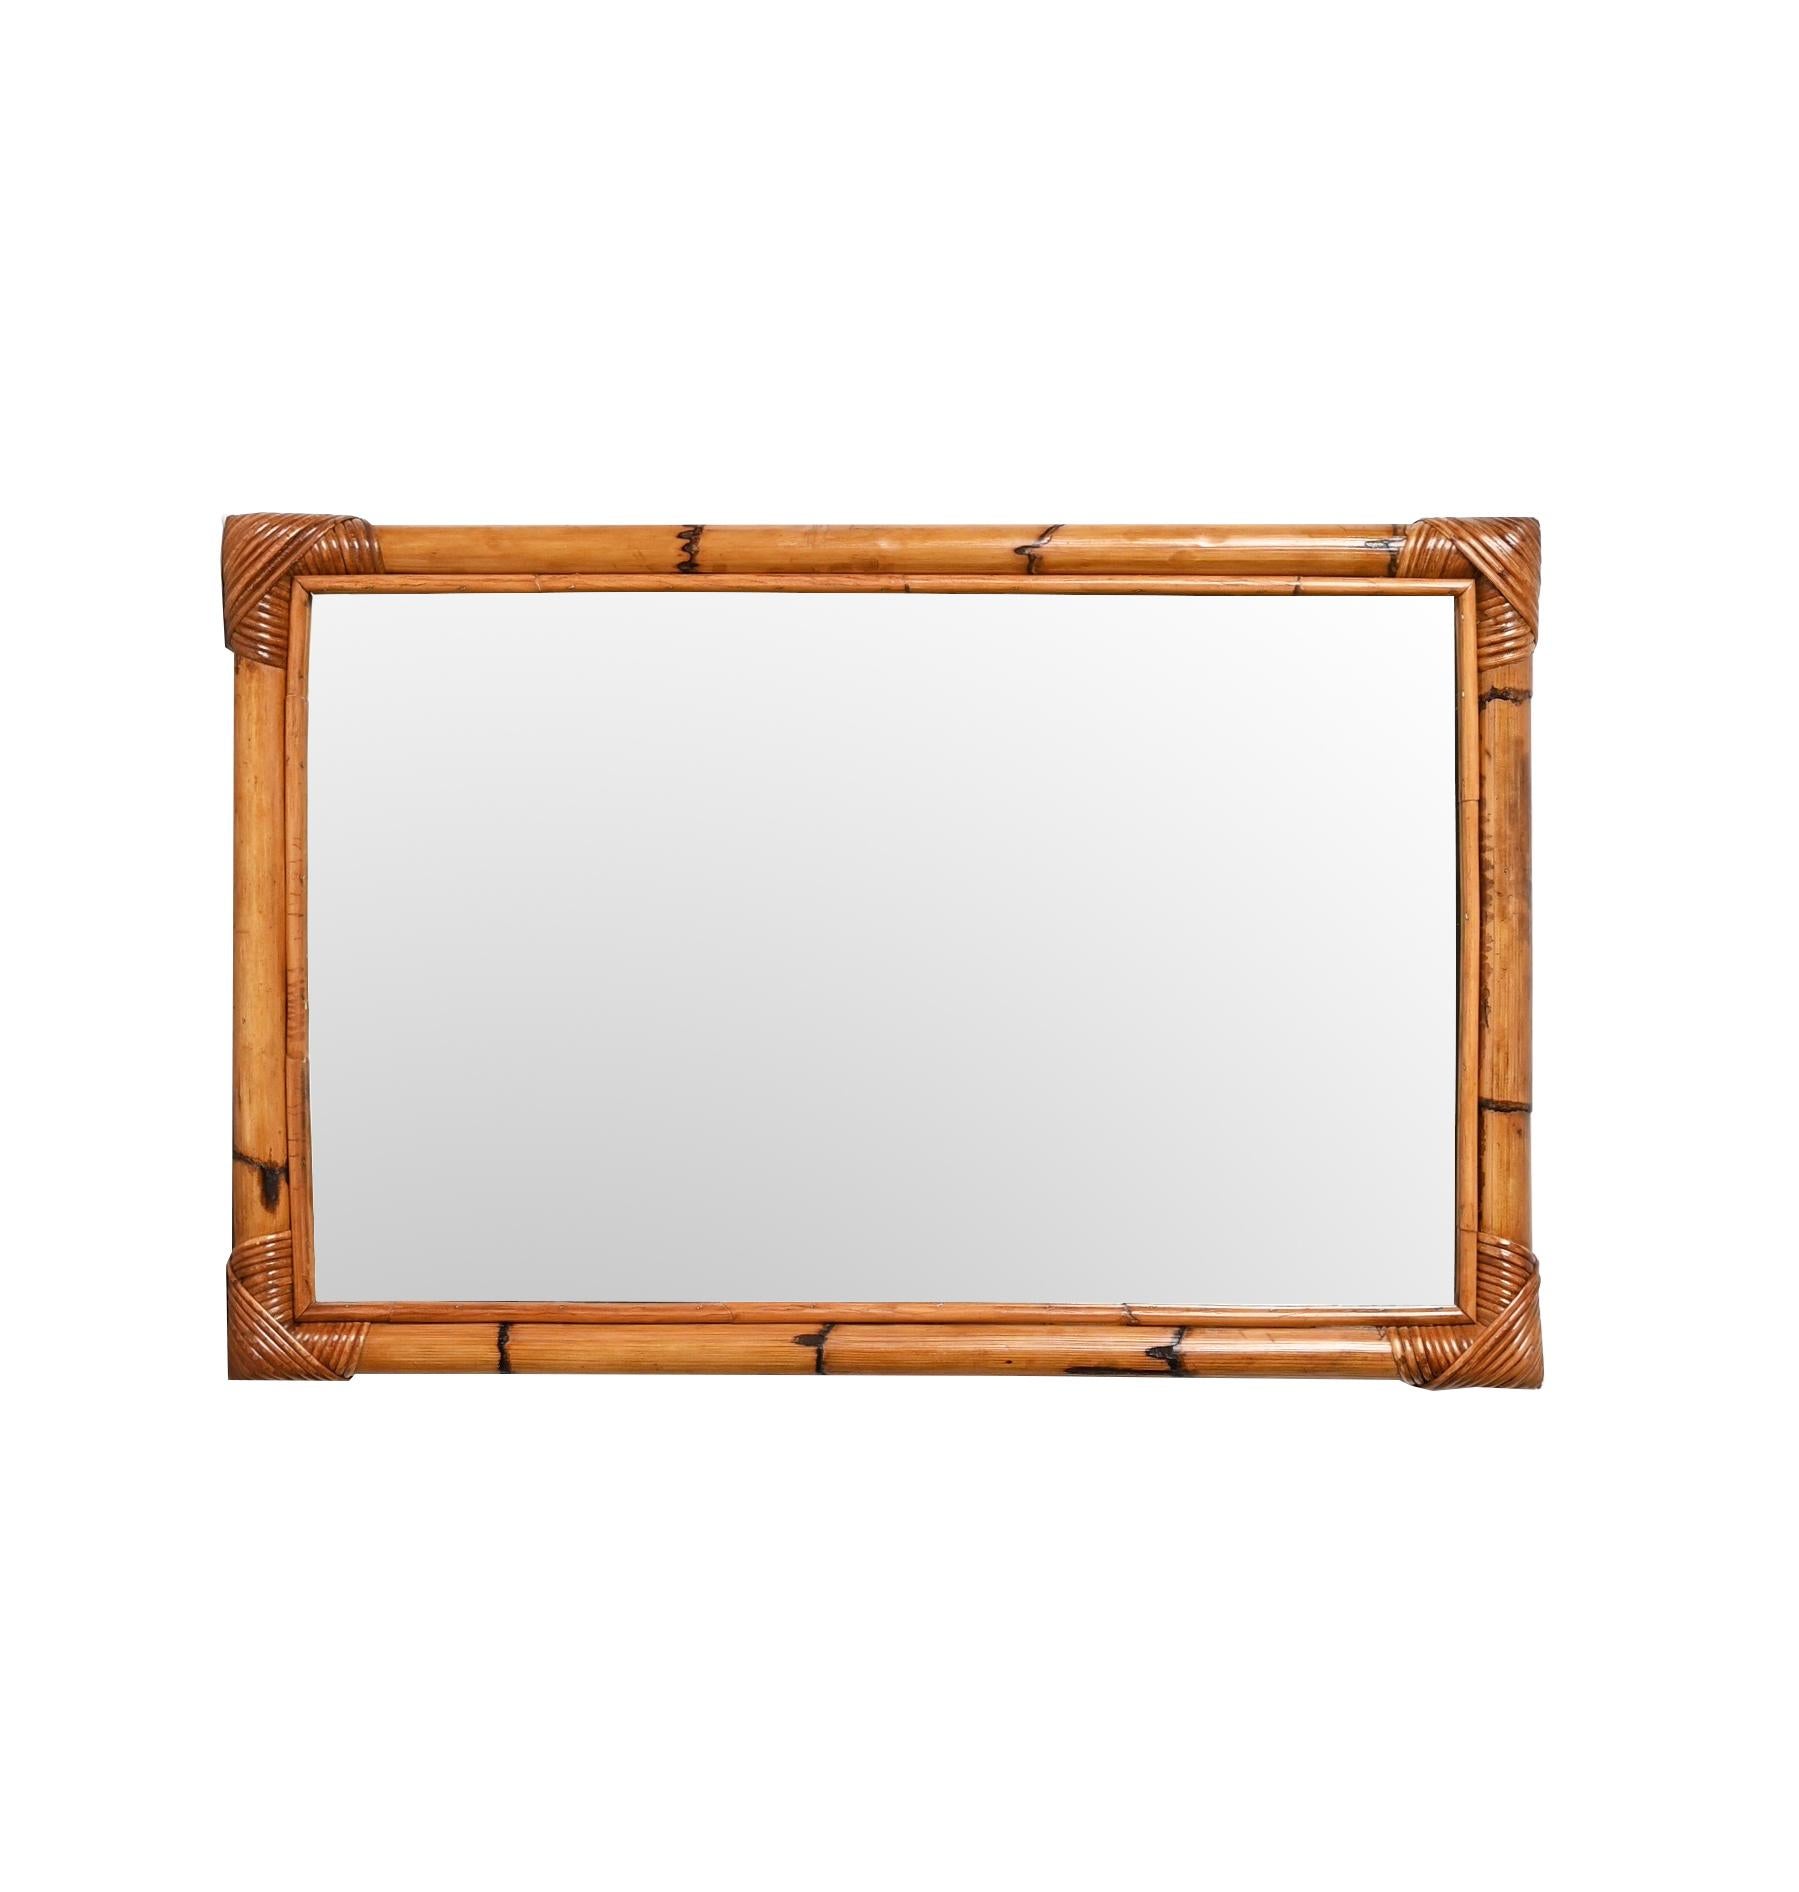 Midcentury Rectangular Italian Mirror with Double Bamboo Cane Frame, 1970s For Sale 2